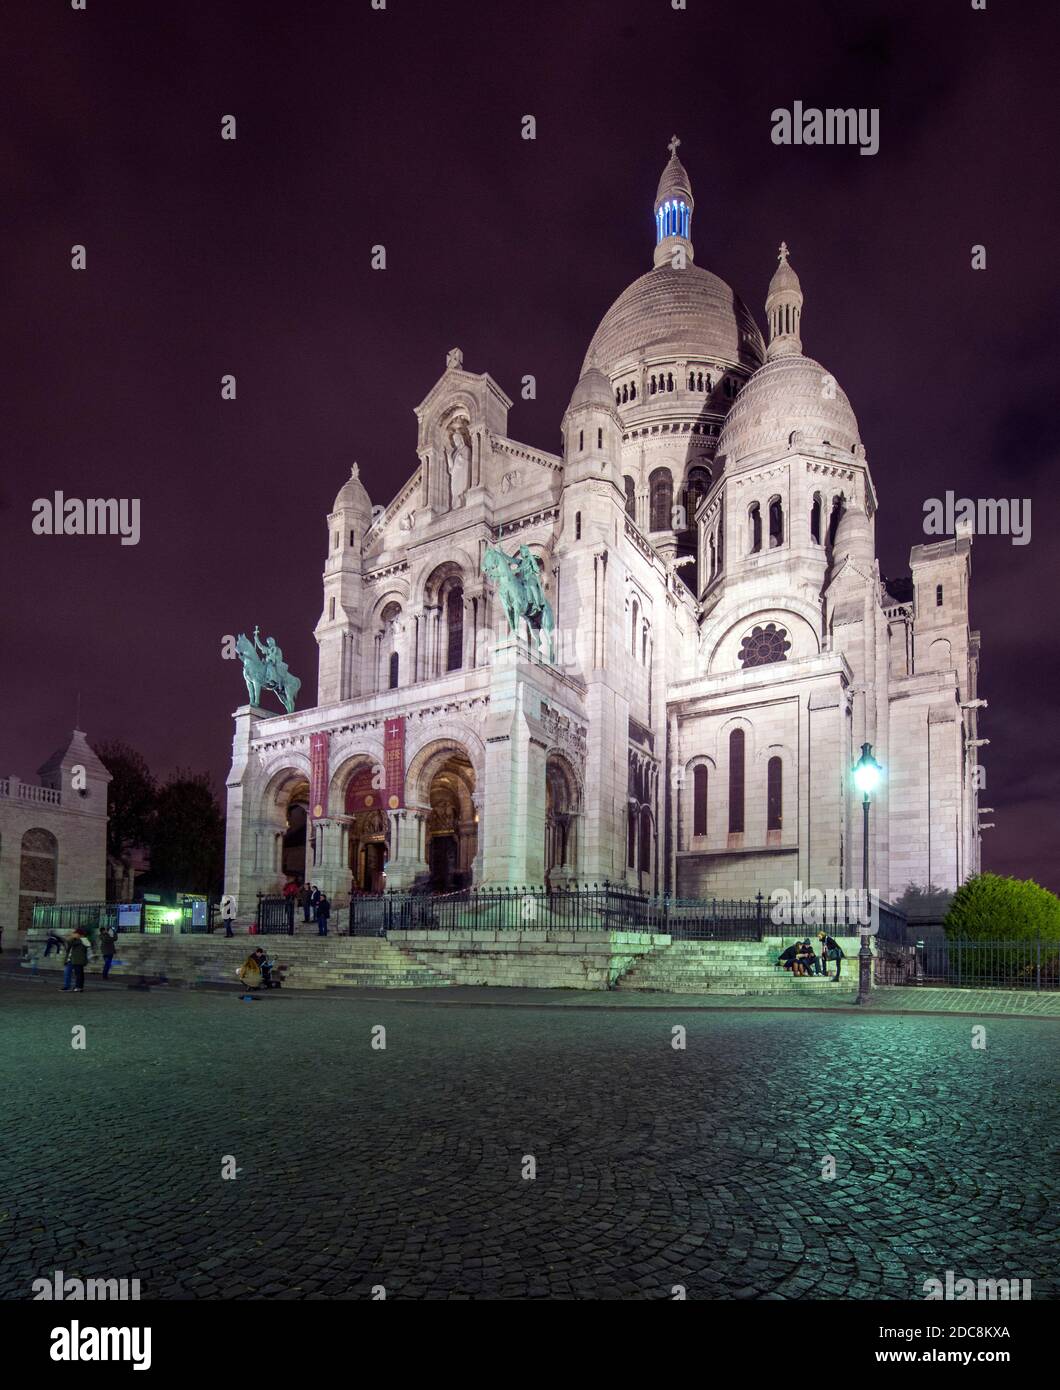 Night photograph of the cathedral Sacre Coeur - Basilica of the Scared Heart - Montmartre, Paris, France, EU. Stock Photo